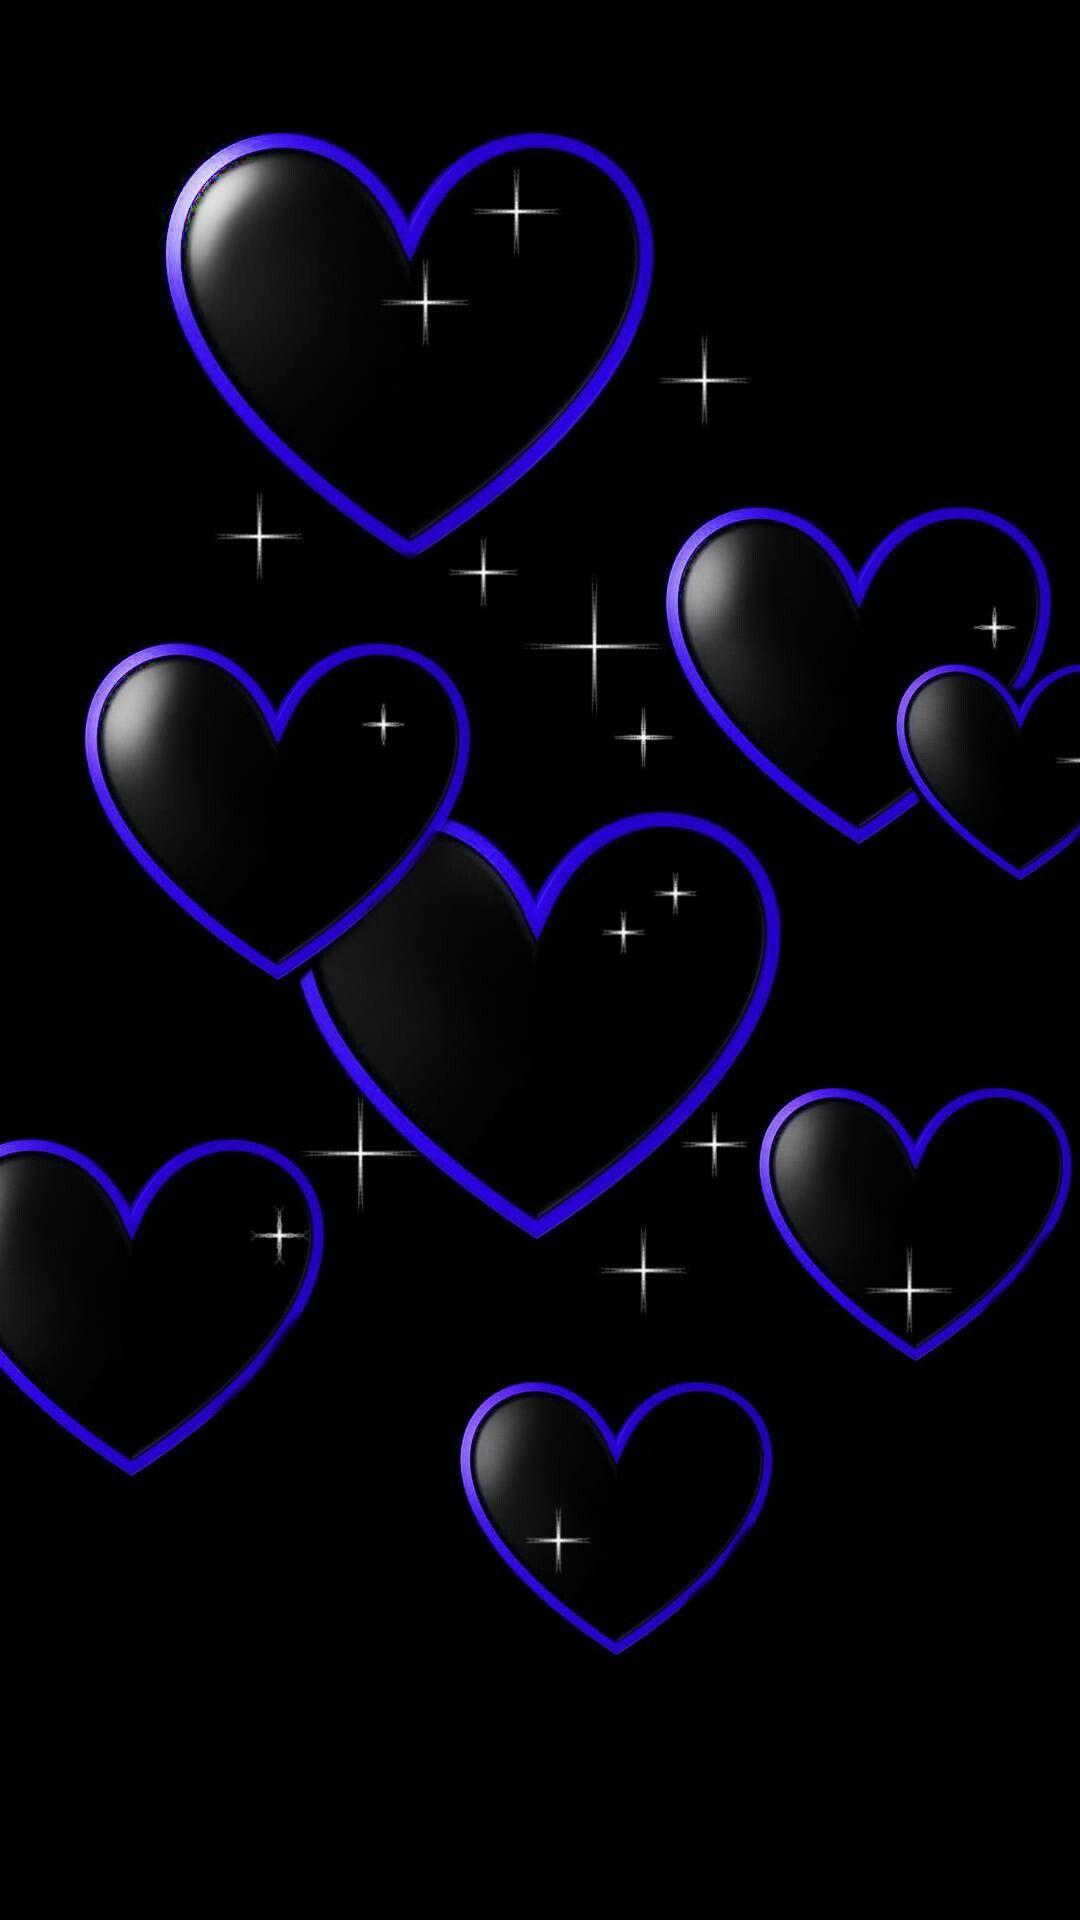 Black and Blue Hearts Wallpapers - Top Free Black and Blue Hearts ...